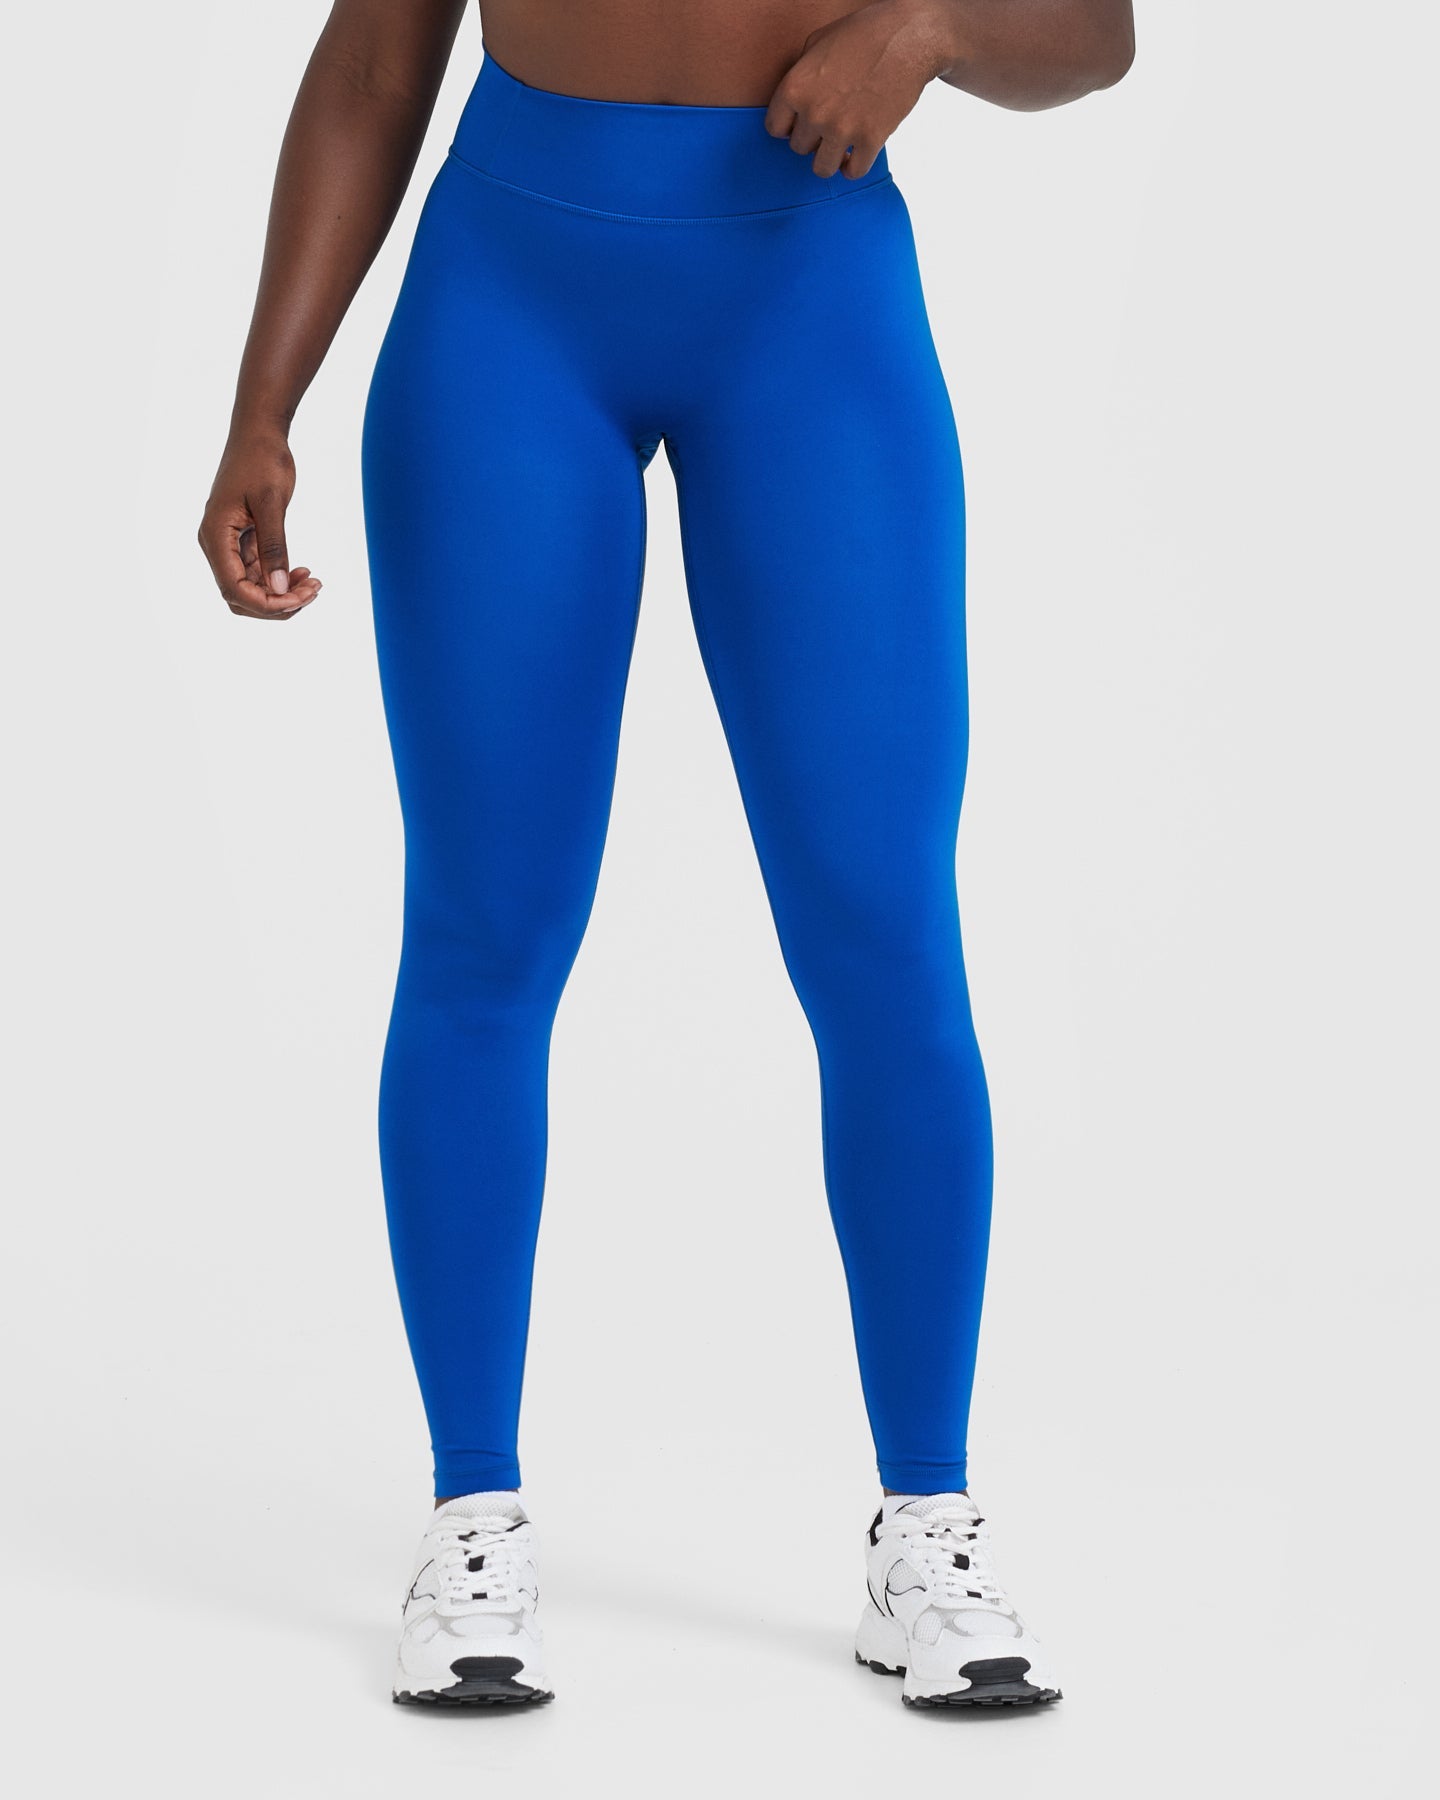 Cobalt Blue Work Out Set | Workout clothes brands, Womens workout outfits,  Fitness photography